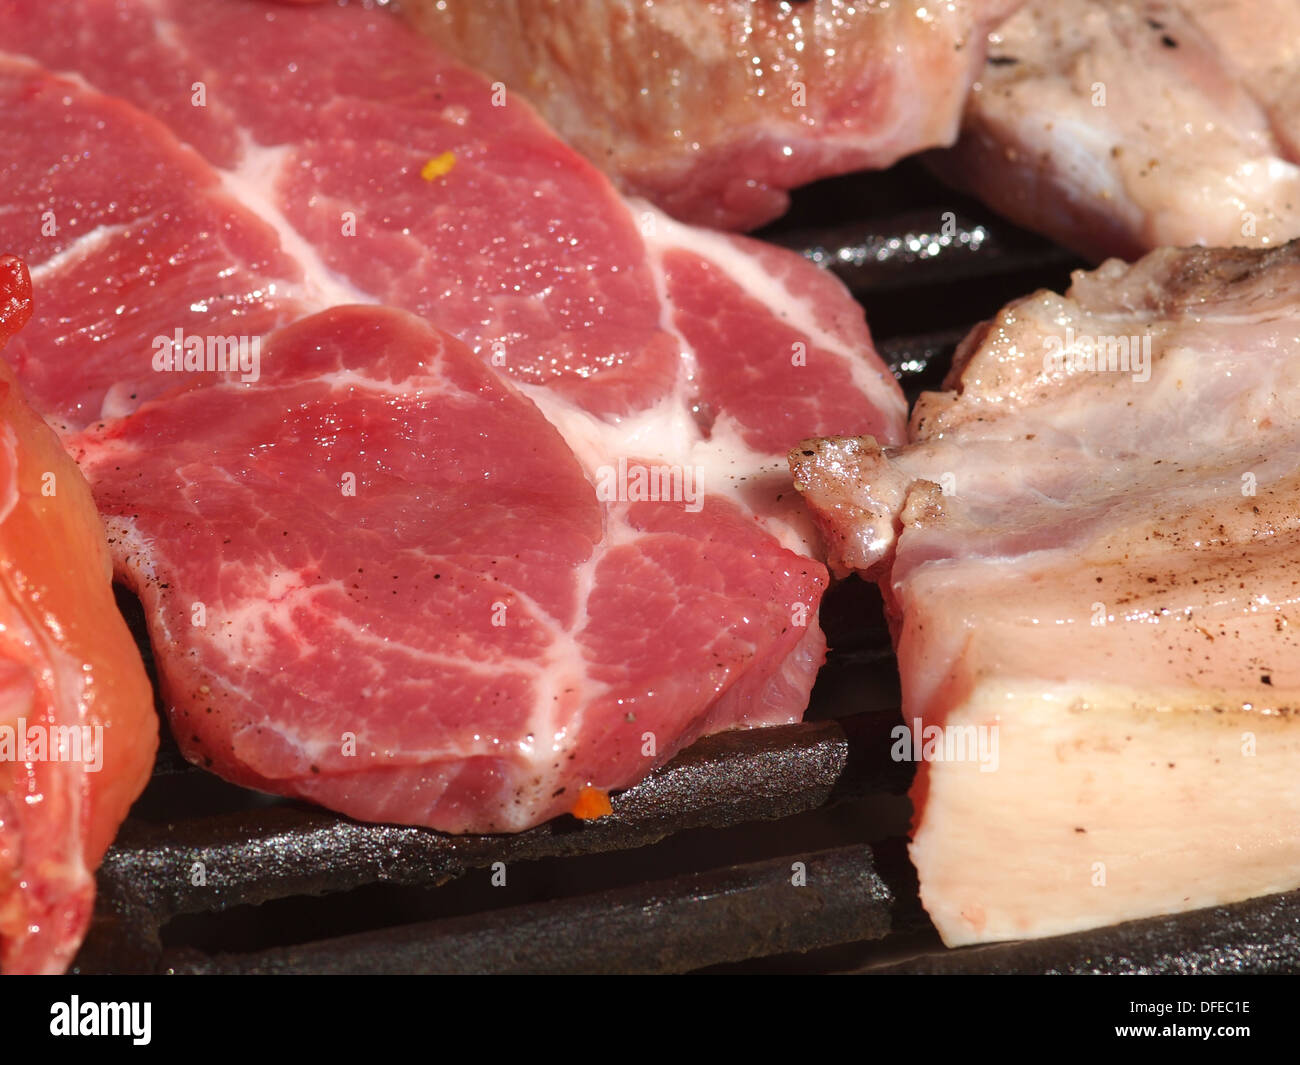 grilled pork meat on the barbeque Stock Photo